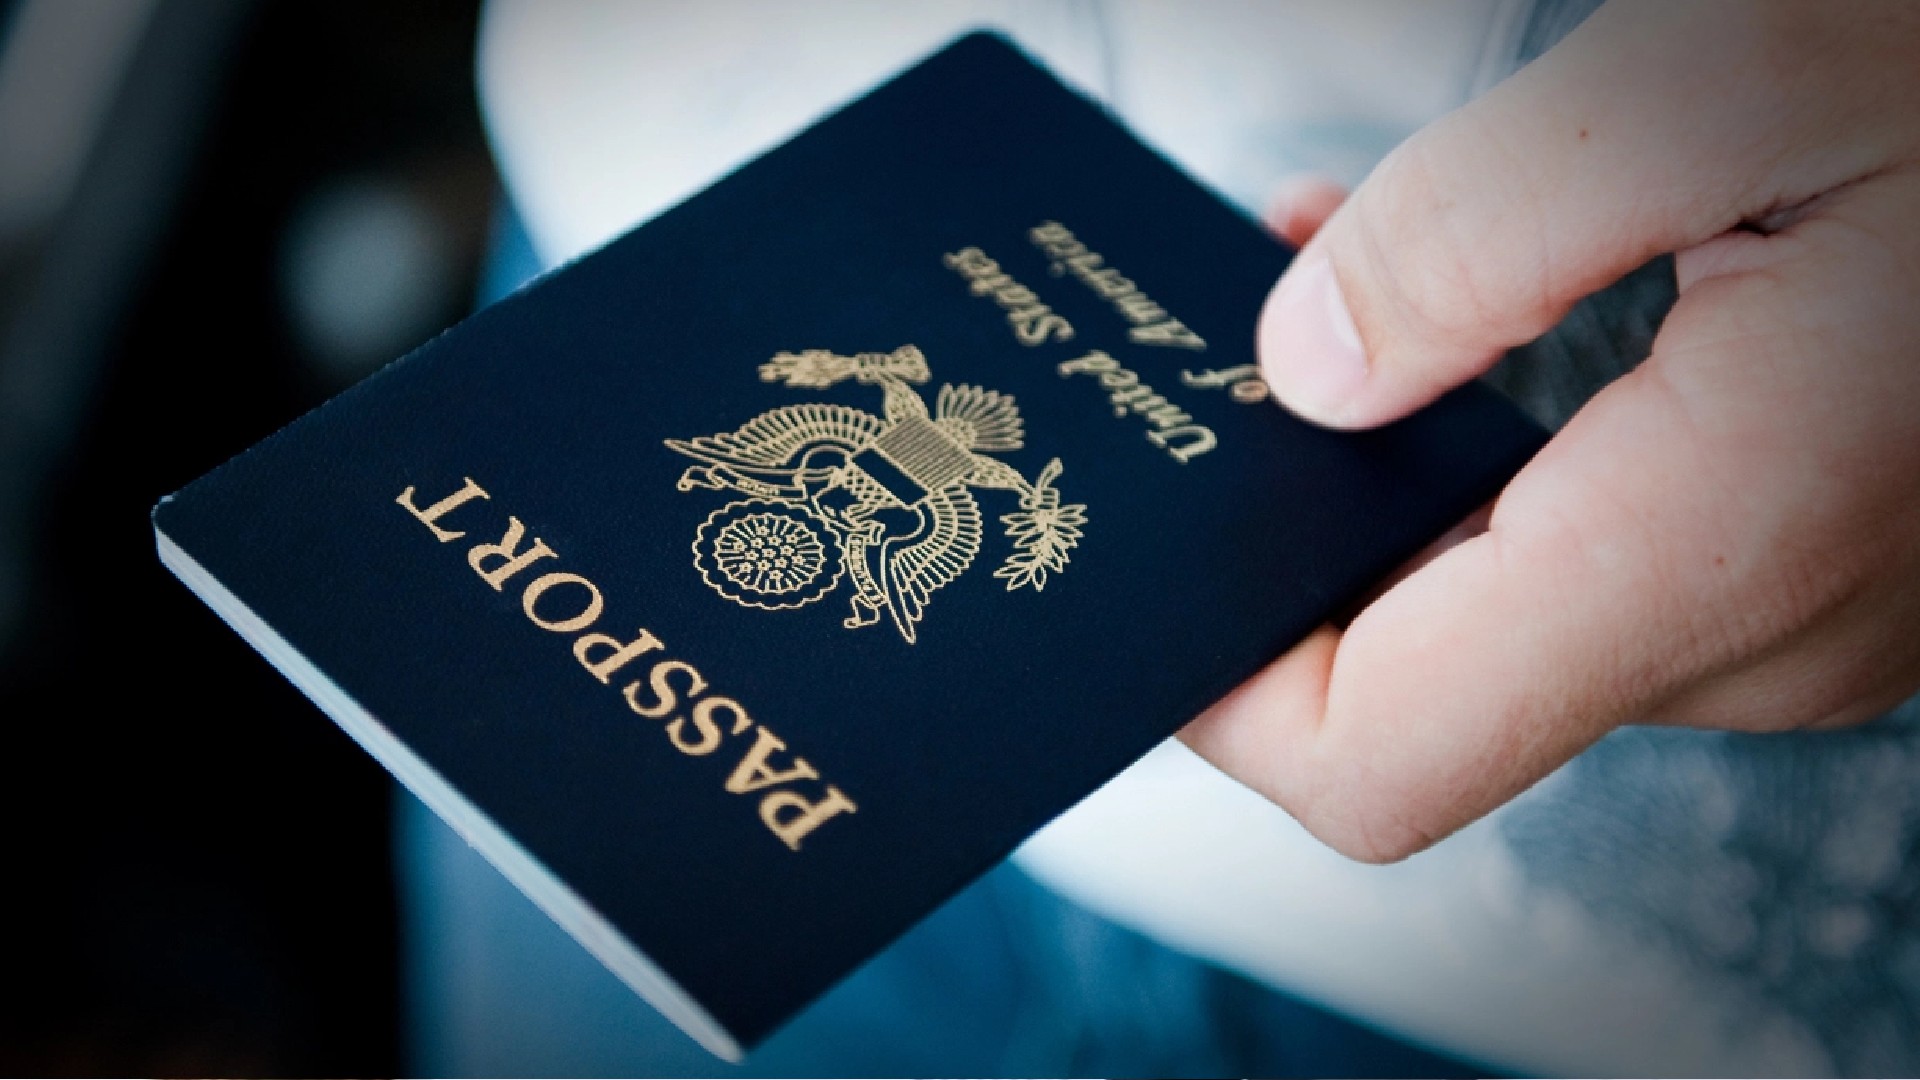 The U.s. Will Add ‘x’ Gender Markers To Passports Without Requiring Medical Documentation.